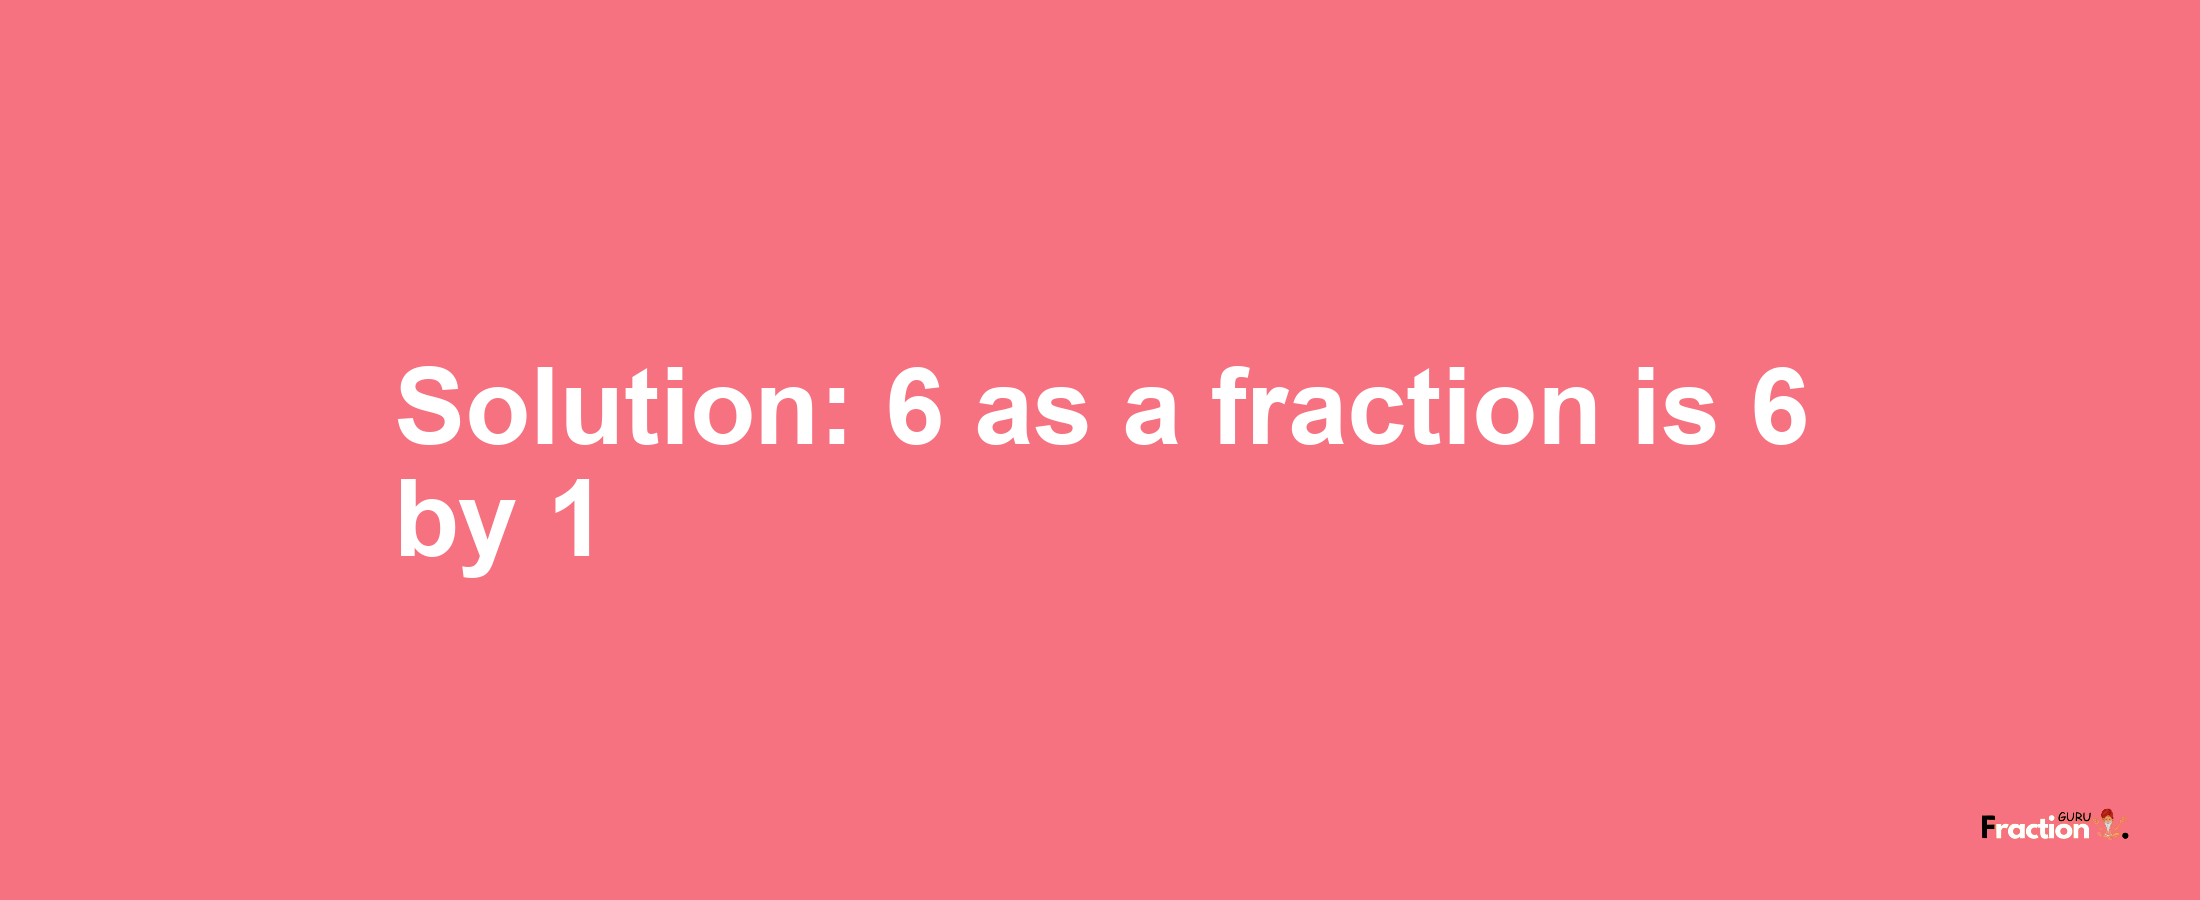 Solution:6 as a fraction is 6/1